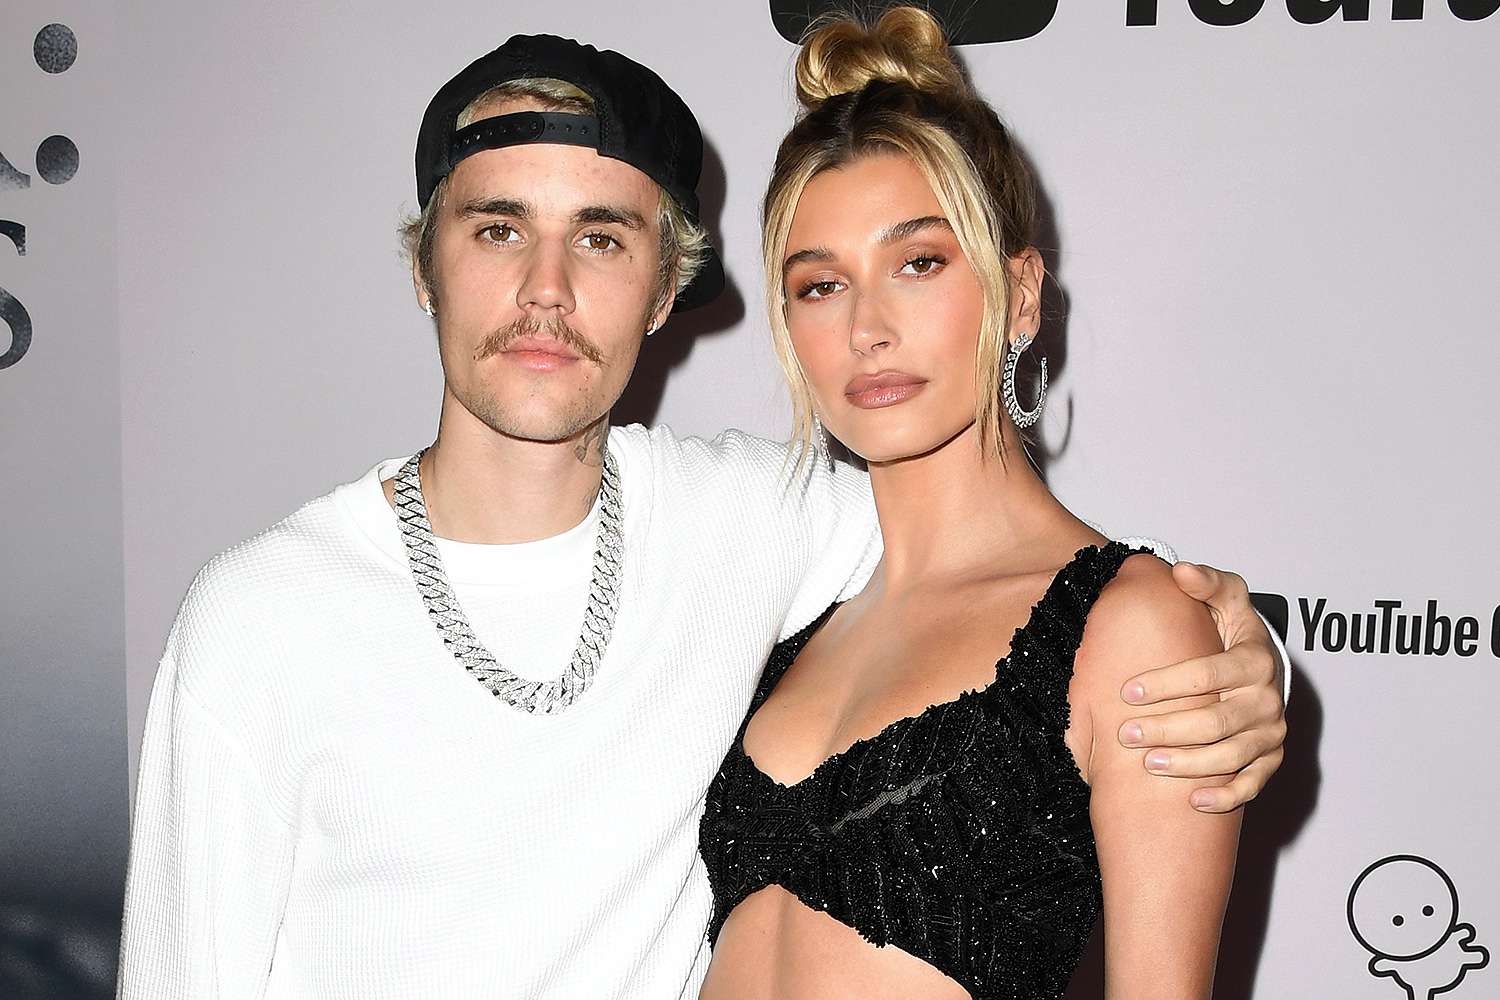 Hailey Bieber Is Pregnant! Model and Husband Justin Bieber Expecting First Baby Together